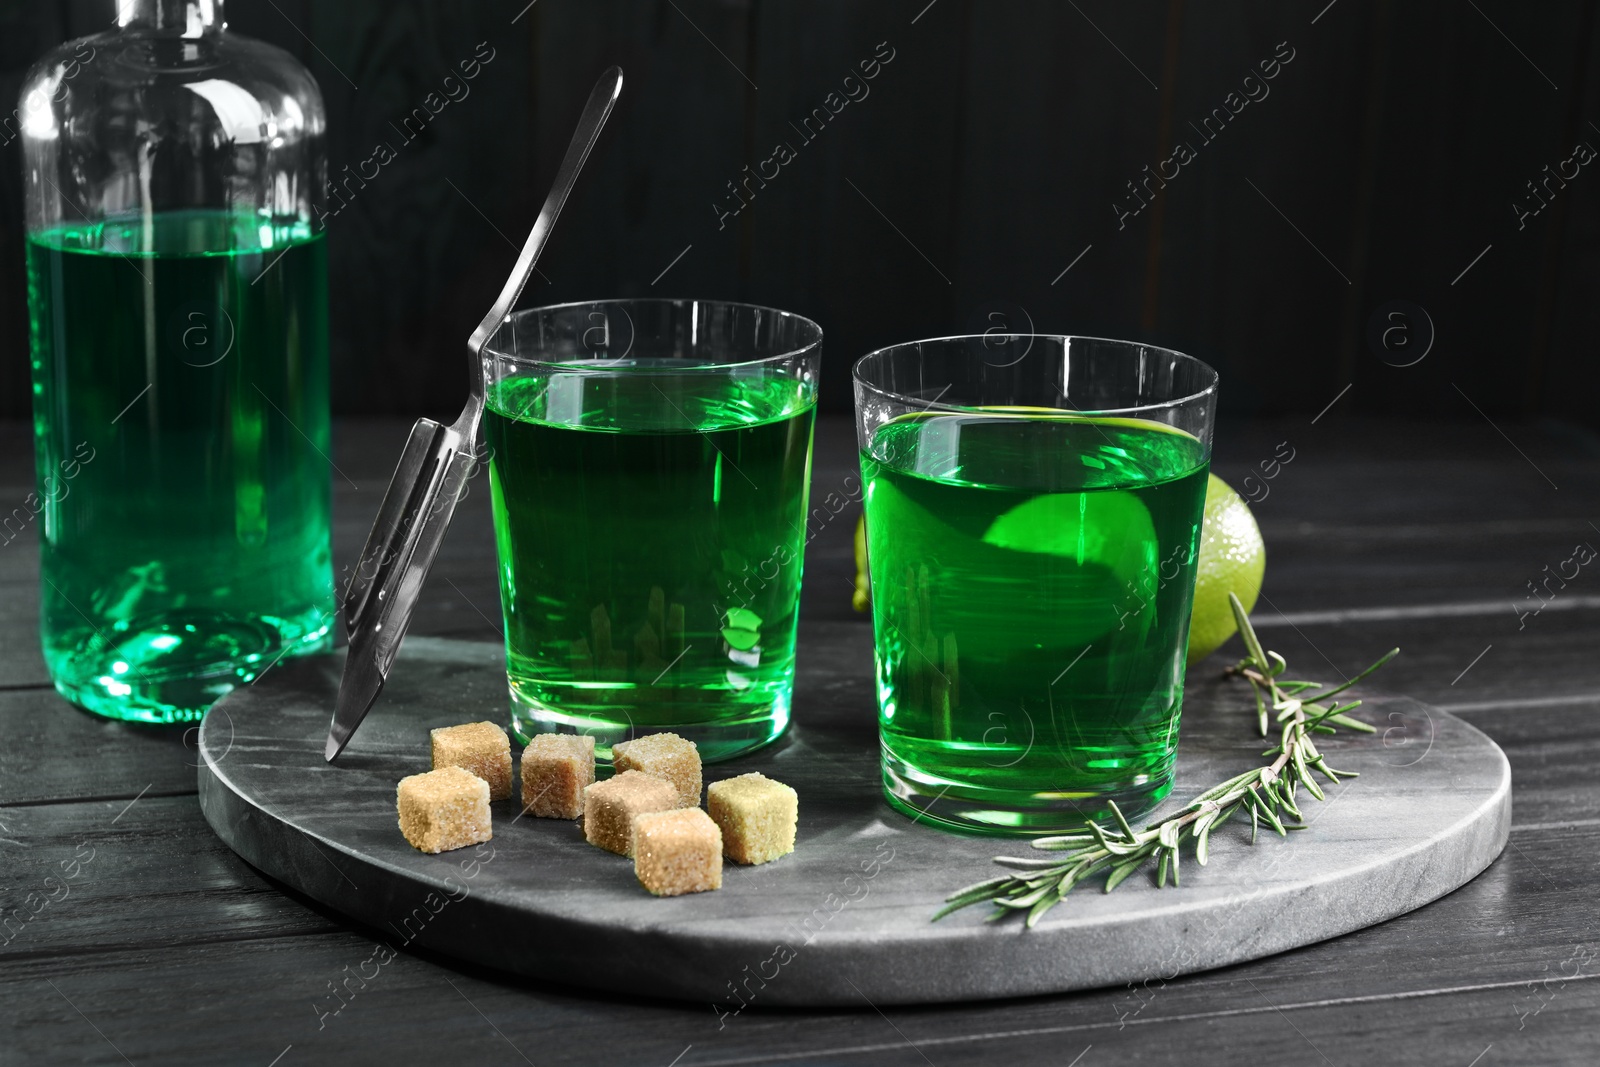 Photo of Absinthe in glasses, rosemary, brown sugar and lime on black wooden table. Alcoholic drink